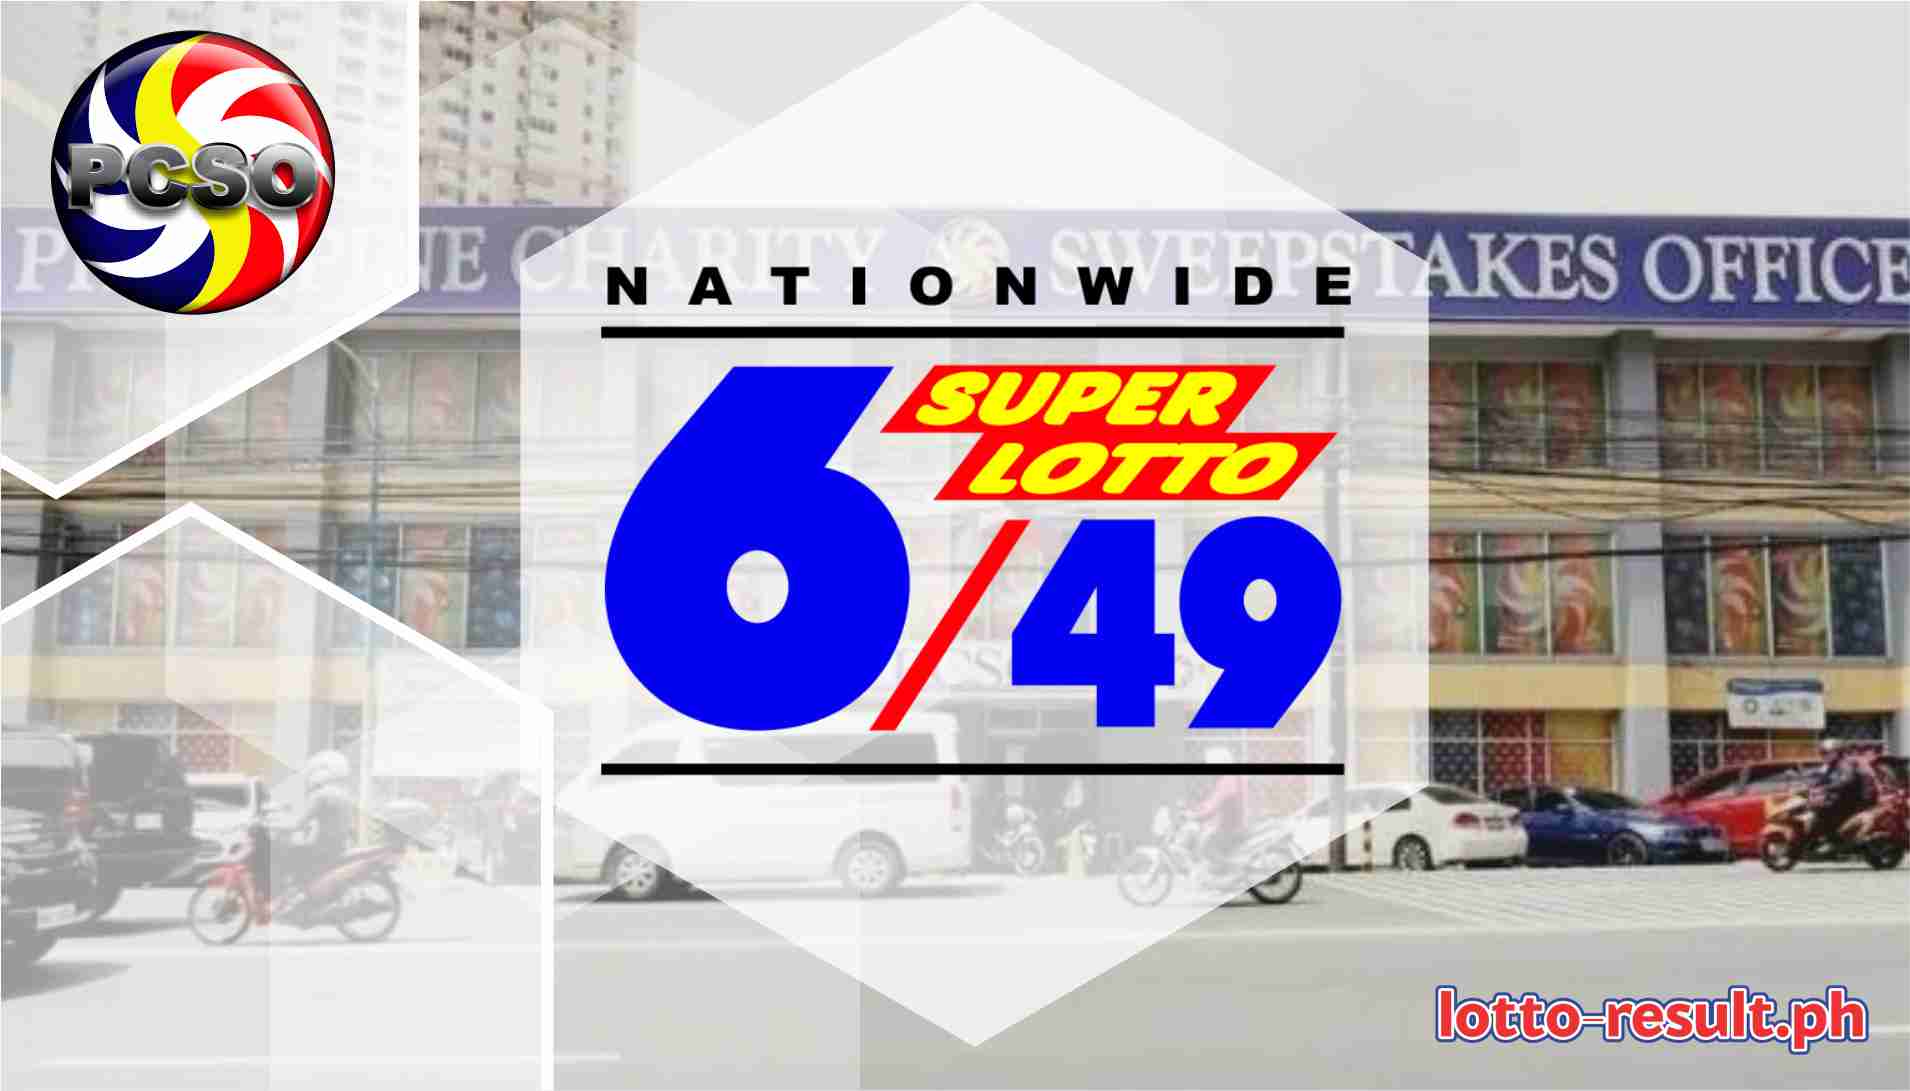 super lotto winning numbers may 14 2022